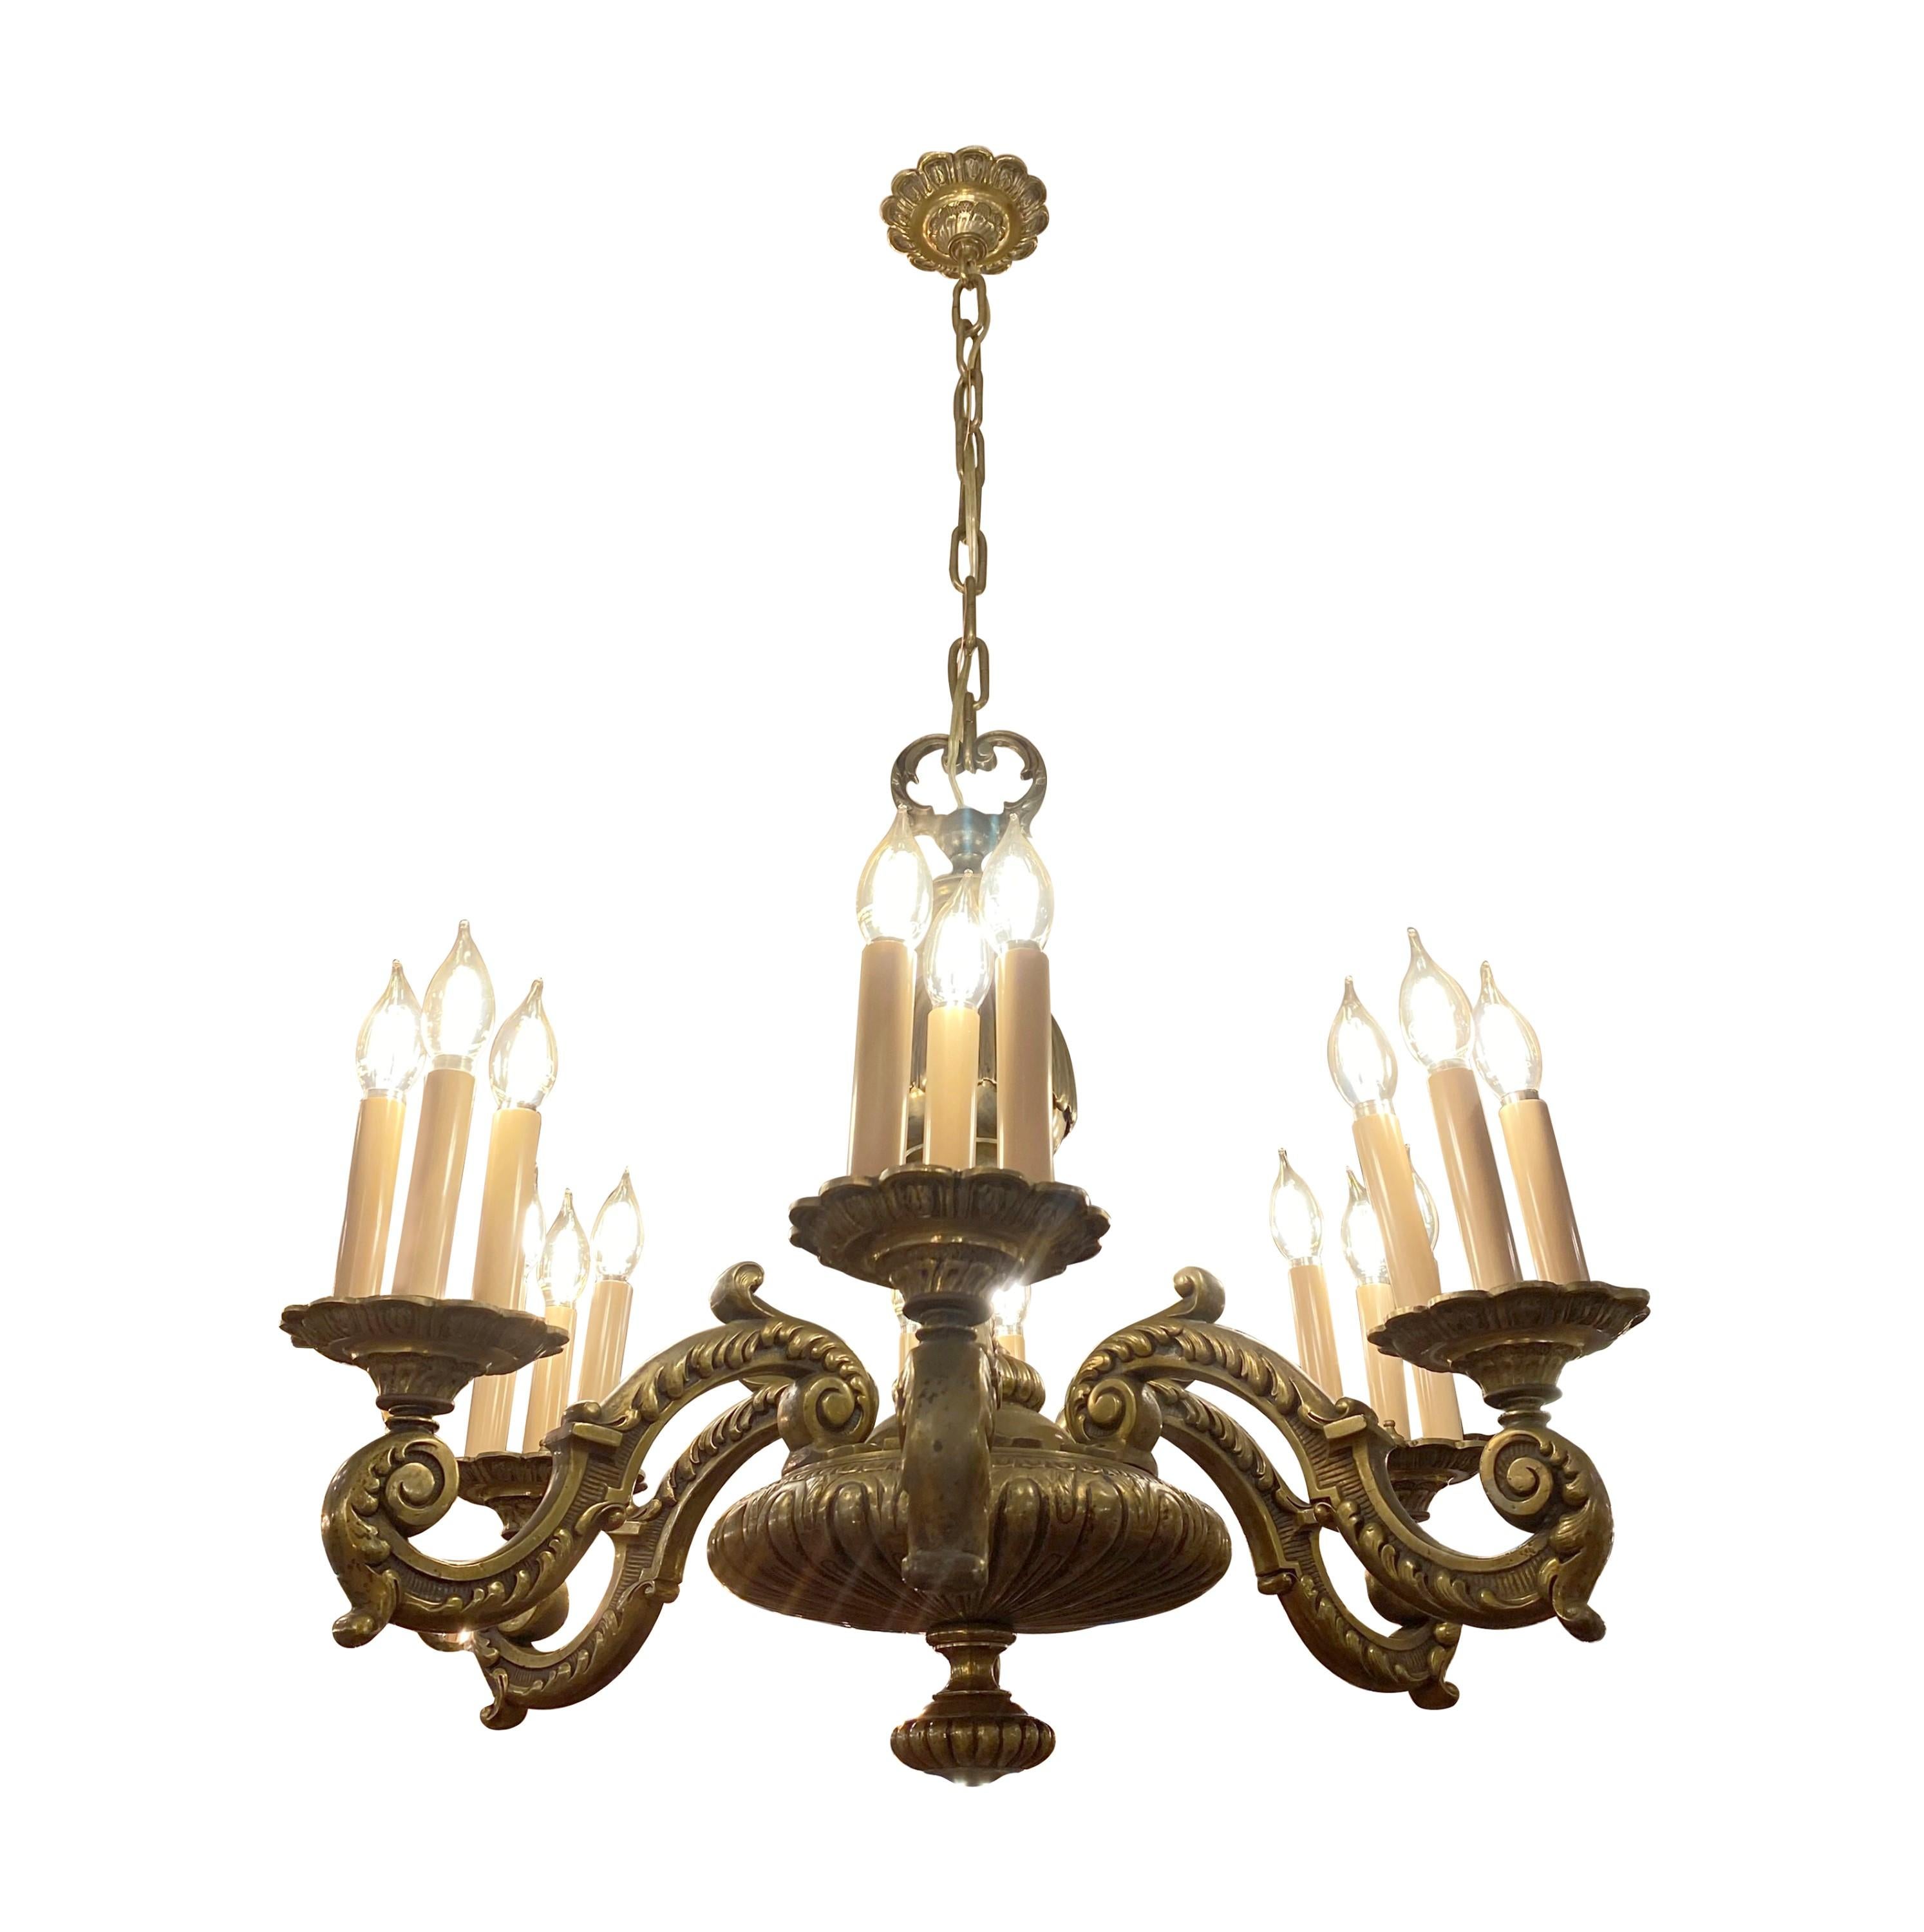 Early 20th century antique bronze chandelier manufactured in France. Features six arms with a hub of three candlestick lights each. Takes 18 standard candelabra style lightbulbs. Cleaned and restored. Please note, this item is located in one of our